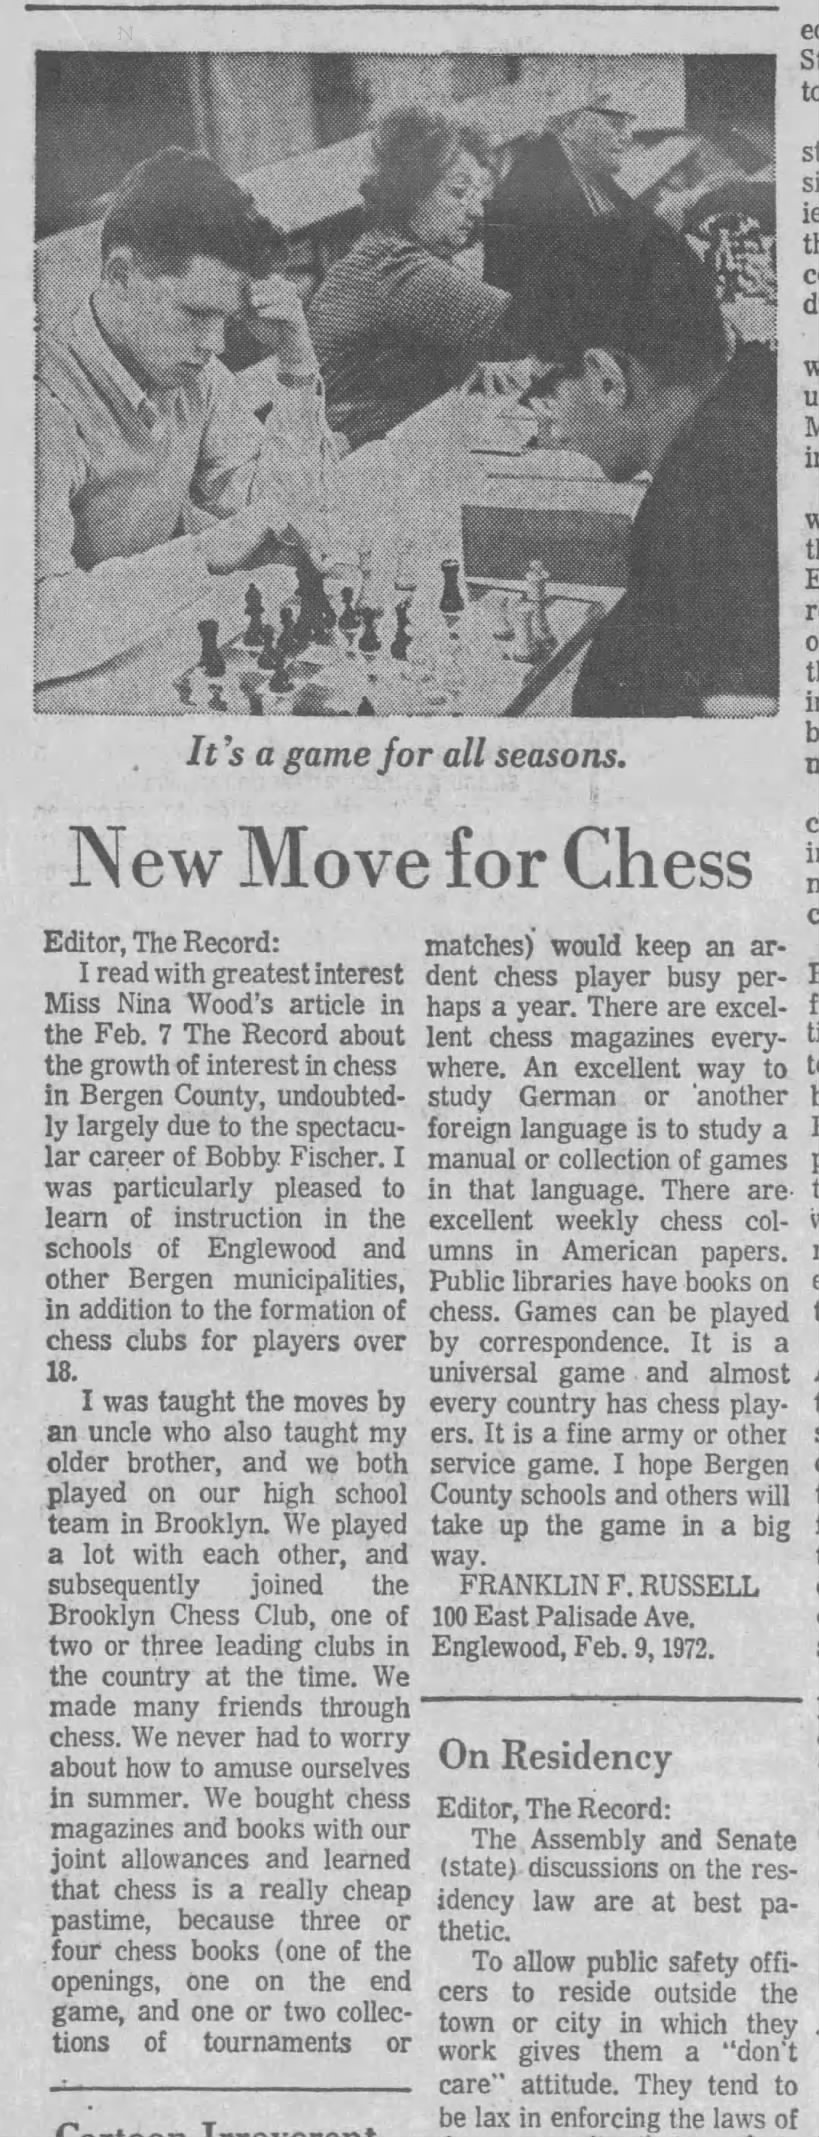 New Move for Chess